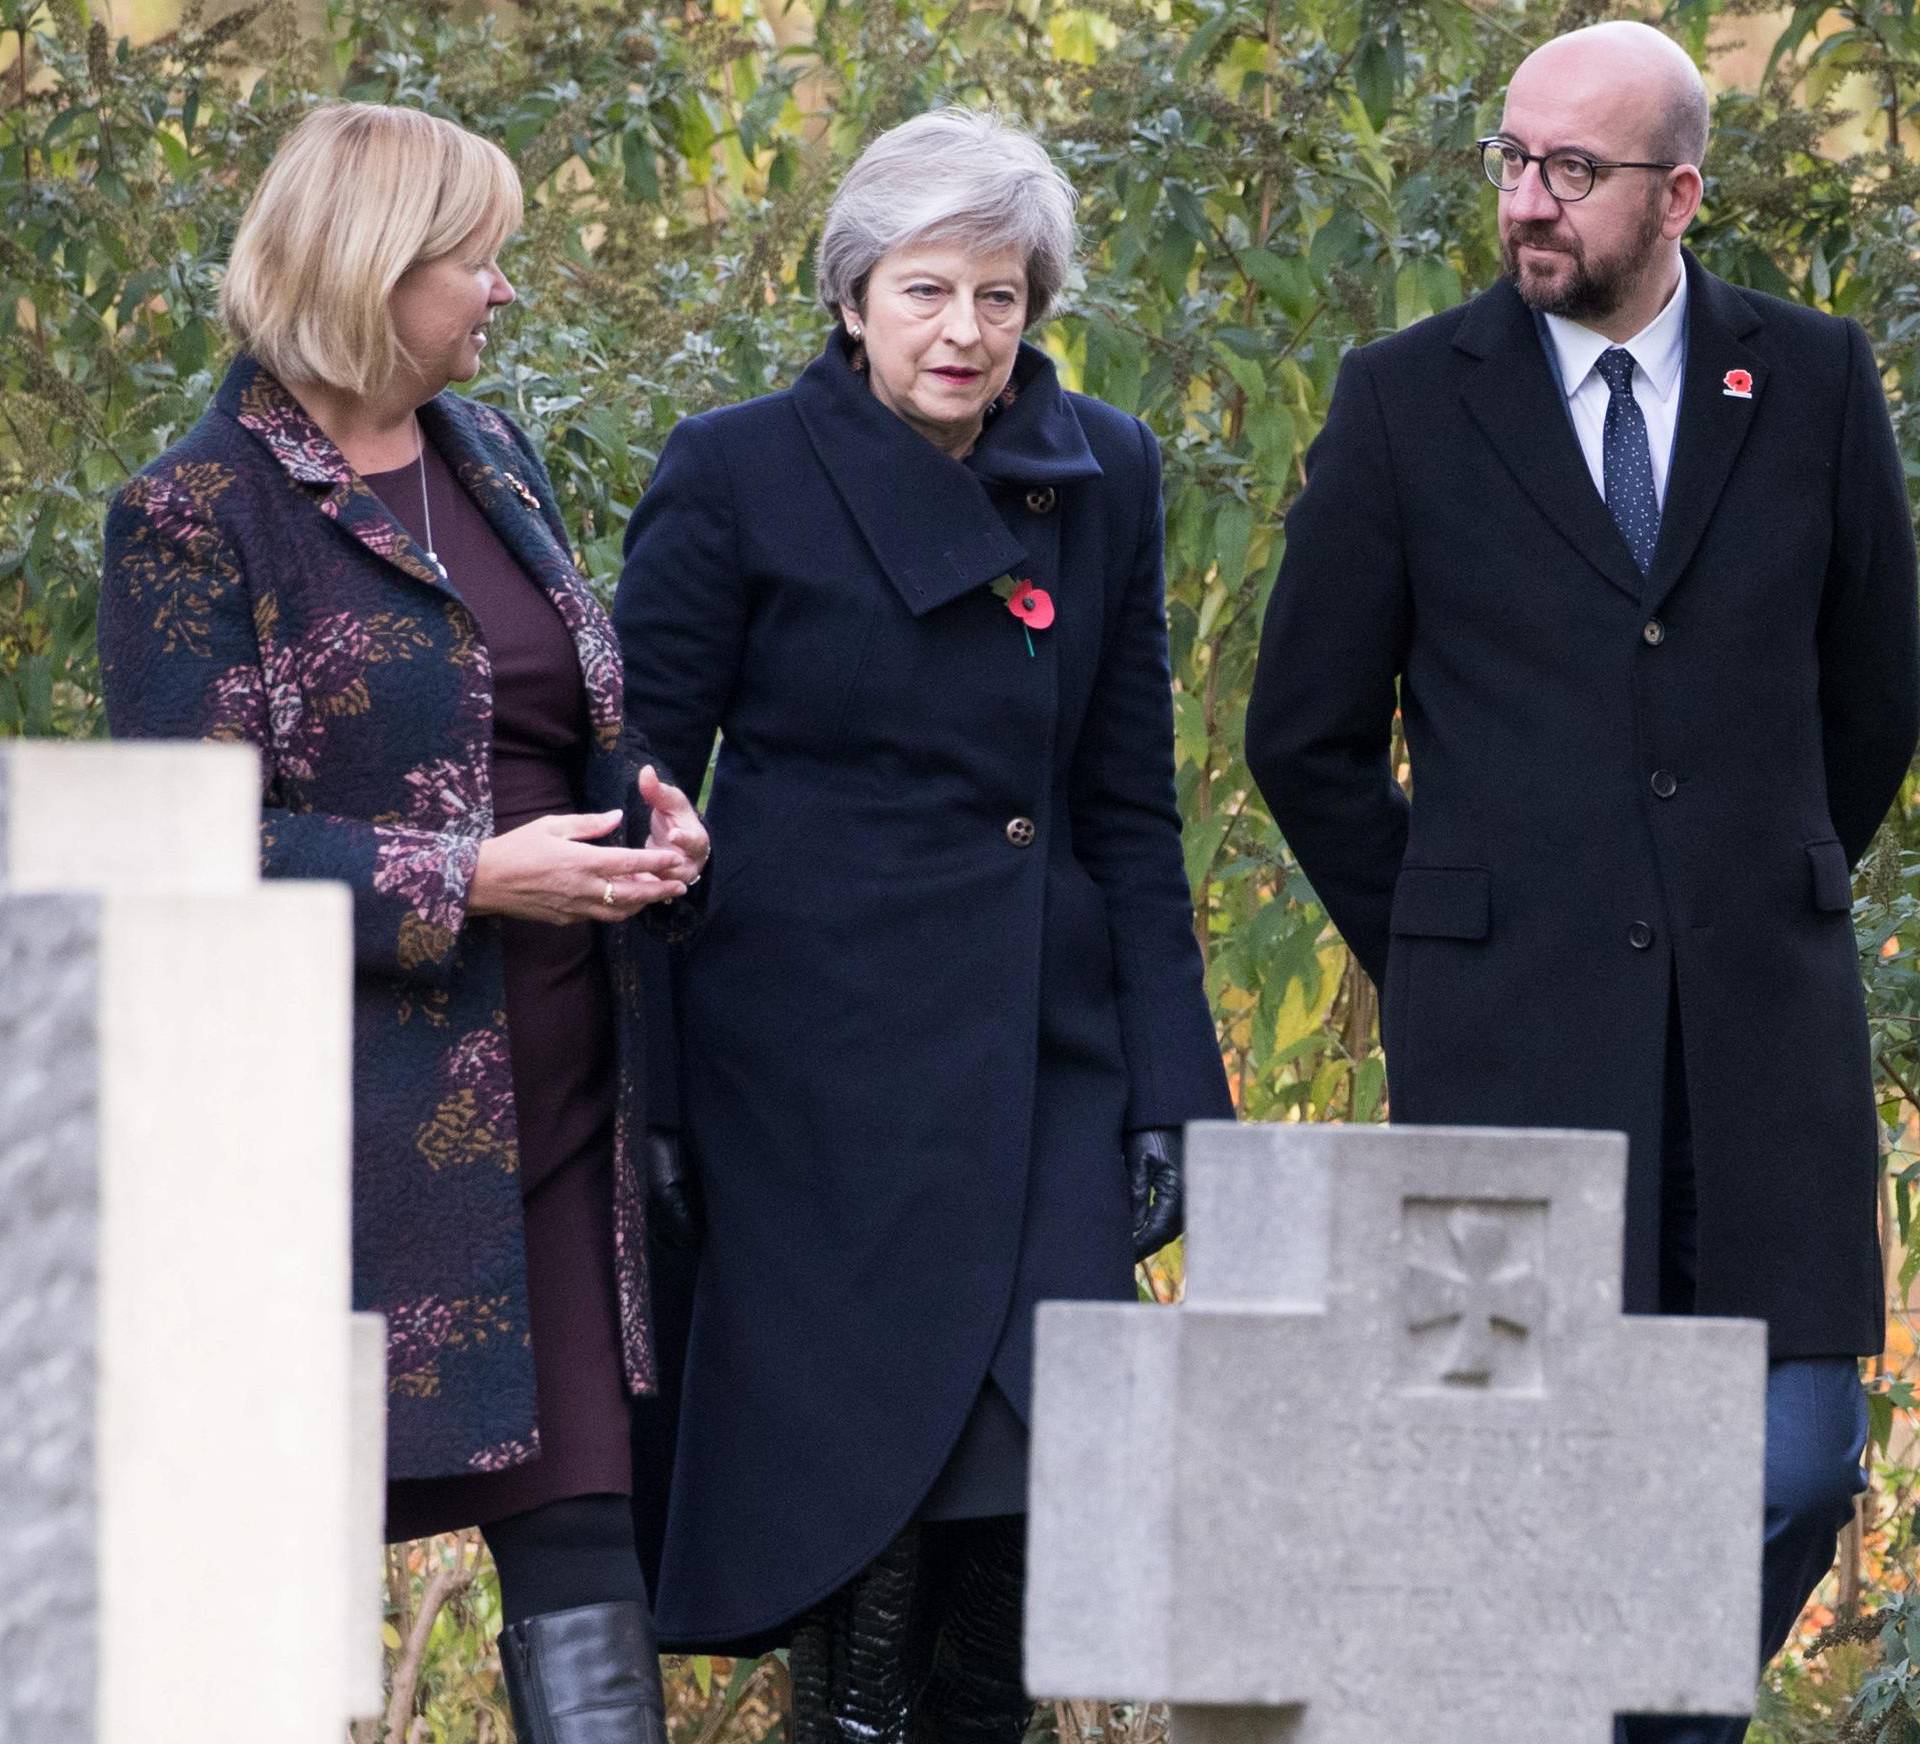 British PM May and Belgian counterpart Michel attend a wreath-laying ceremony marking the 100th anniversary of the end of the First World War, at the Saint Symphorien Military Cemetery in Mons